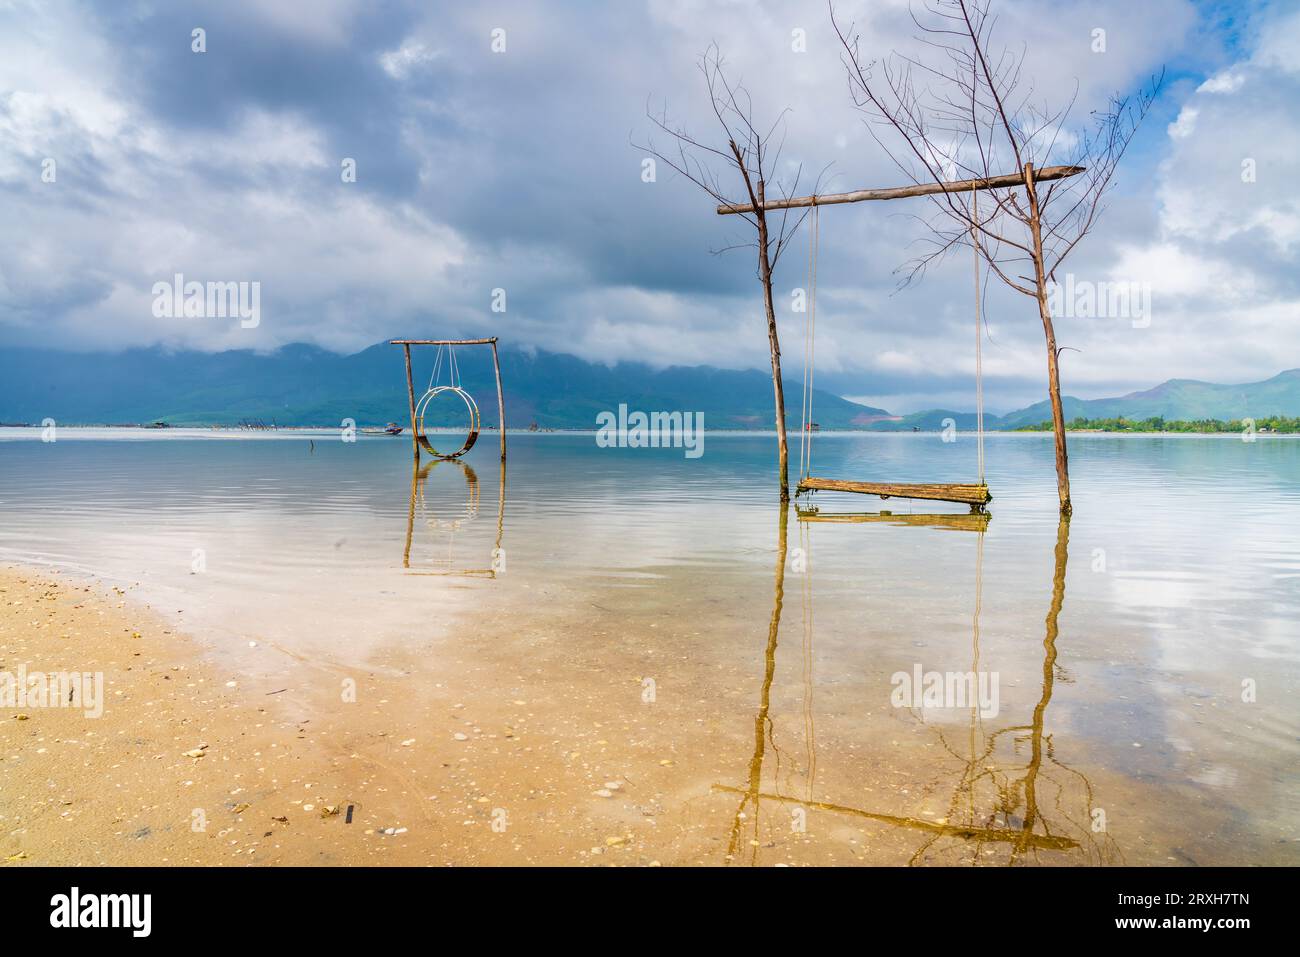 Swing sets in a coastal lagoon in Central Vietnam Stock Photo